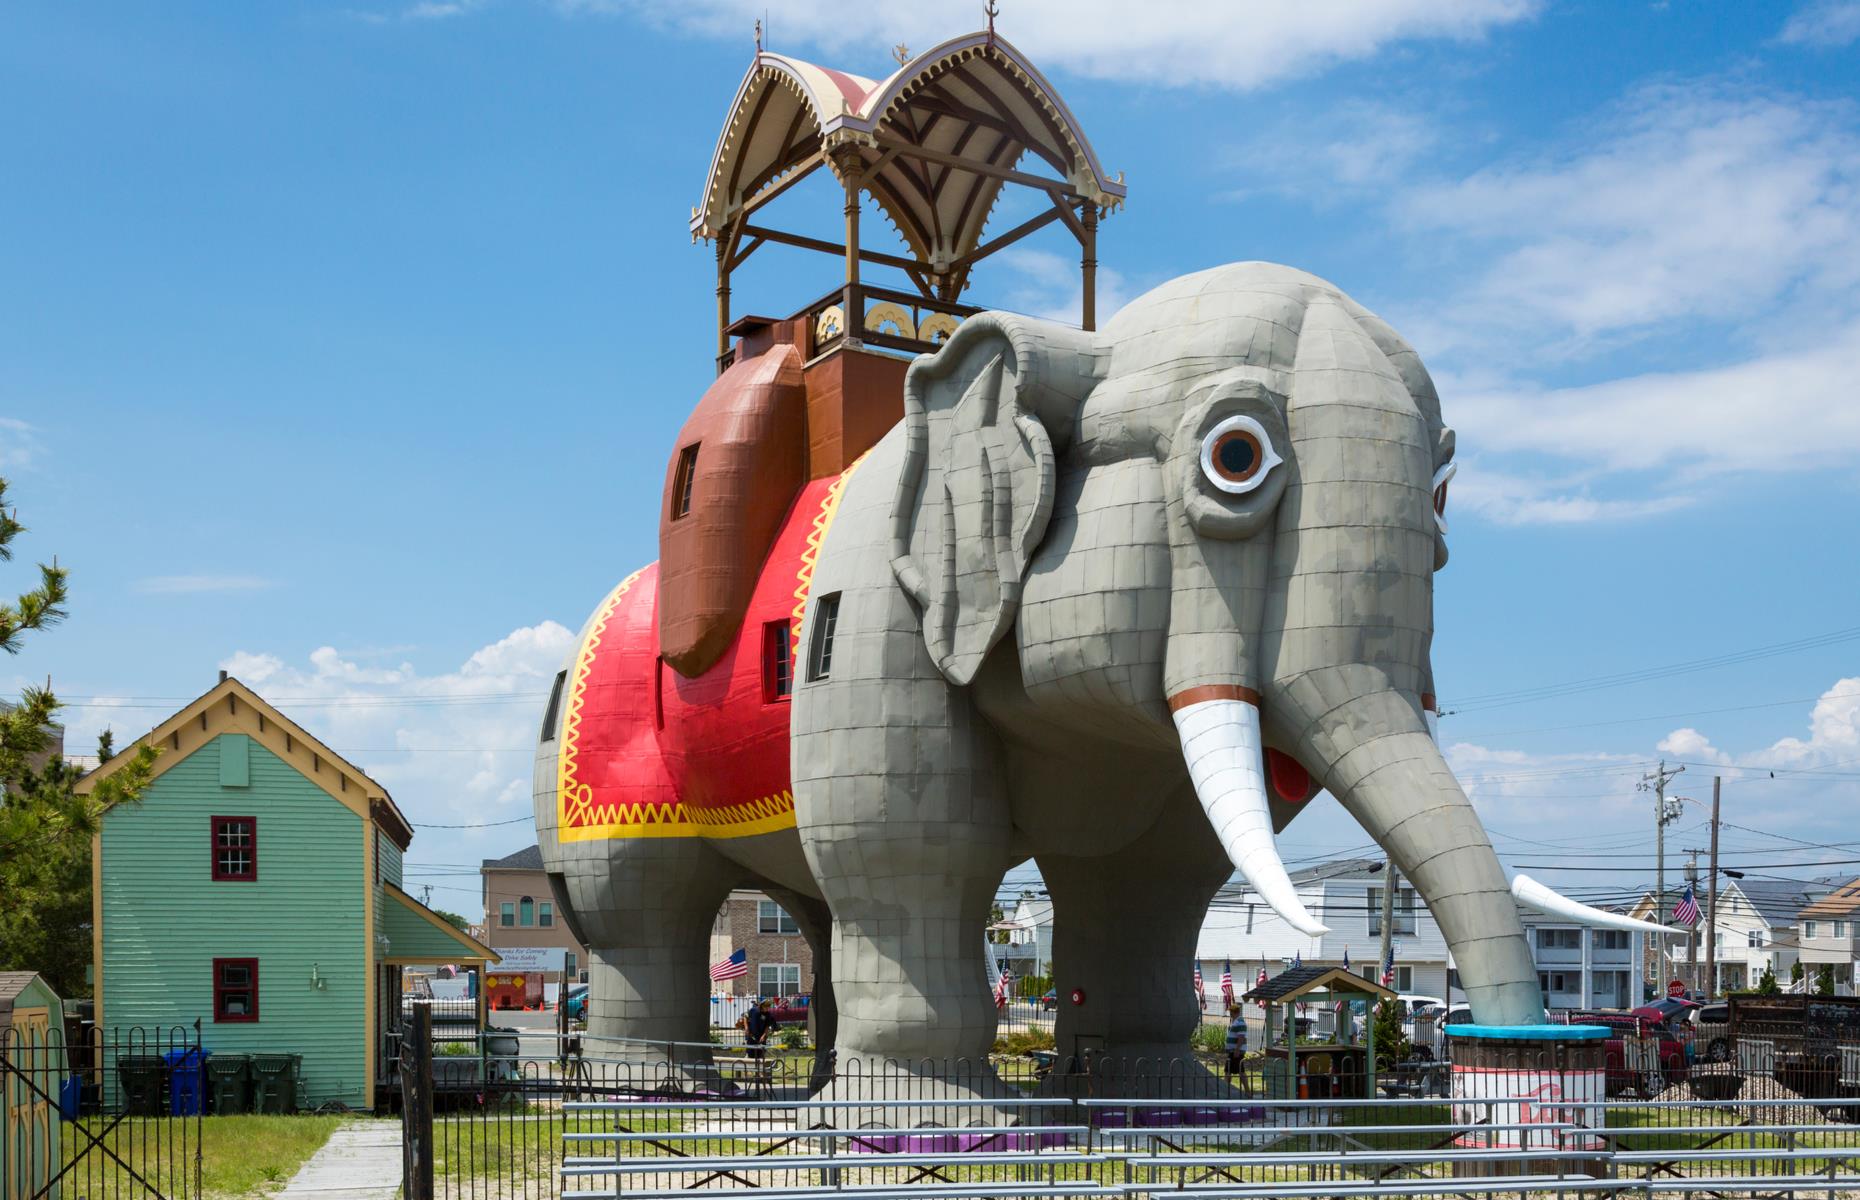 <p><span><a href="https://lucytheelephant.org/">Lucy the Elephant</a></span> is rather old. The tin-and-wood structure was built in 1882, modelled after real-life elephant Jumbo who starred as the ‘Largest Elephant on Earth’ in P.T. Barnum’s circus. She’s also rather large, looming over the coastal city of Margate at a lofty 65 feet (20m) and weighing 90 tons. She once housed offices and a restaurant. Lucy is currently being restored so tours of the inside – usually accessed via a spiral staircase in one of her legs – are suspended. <a href="http://lucytheelephant.org/">Check the website for updates</a>.</p>